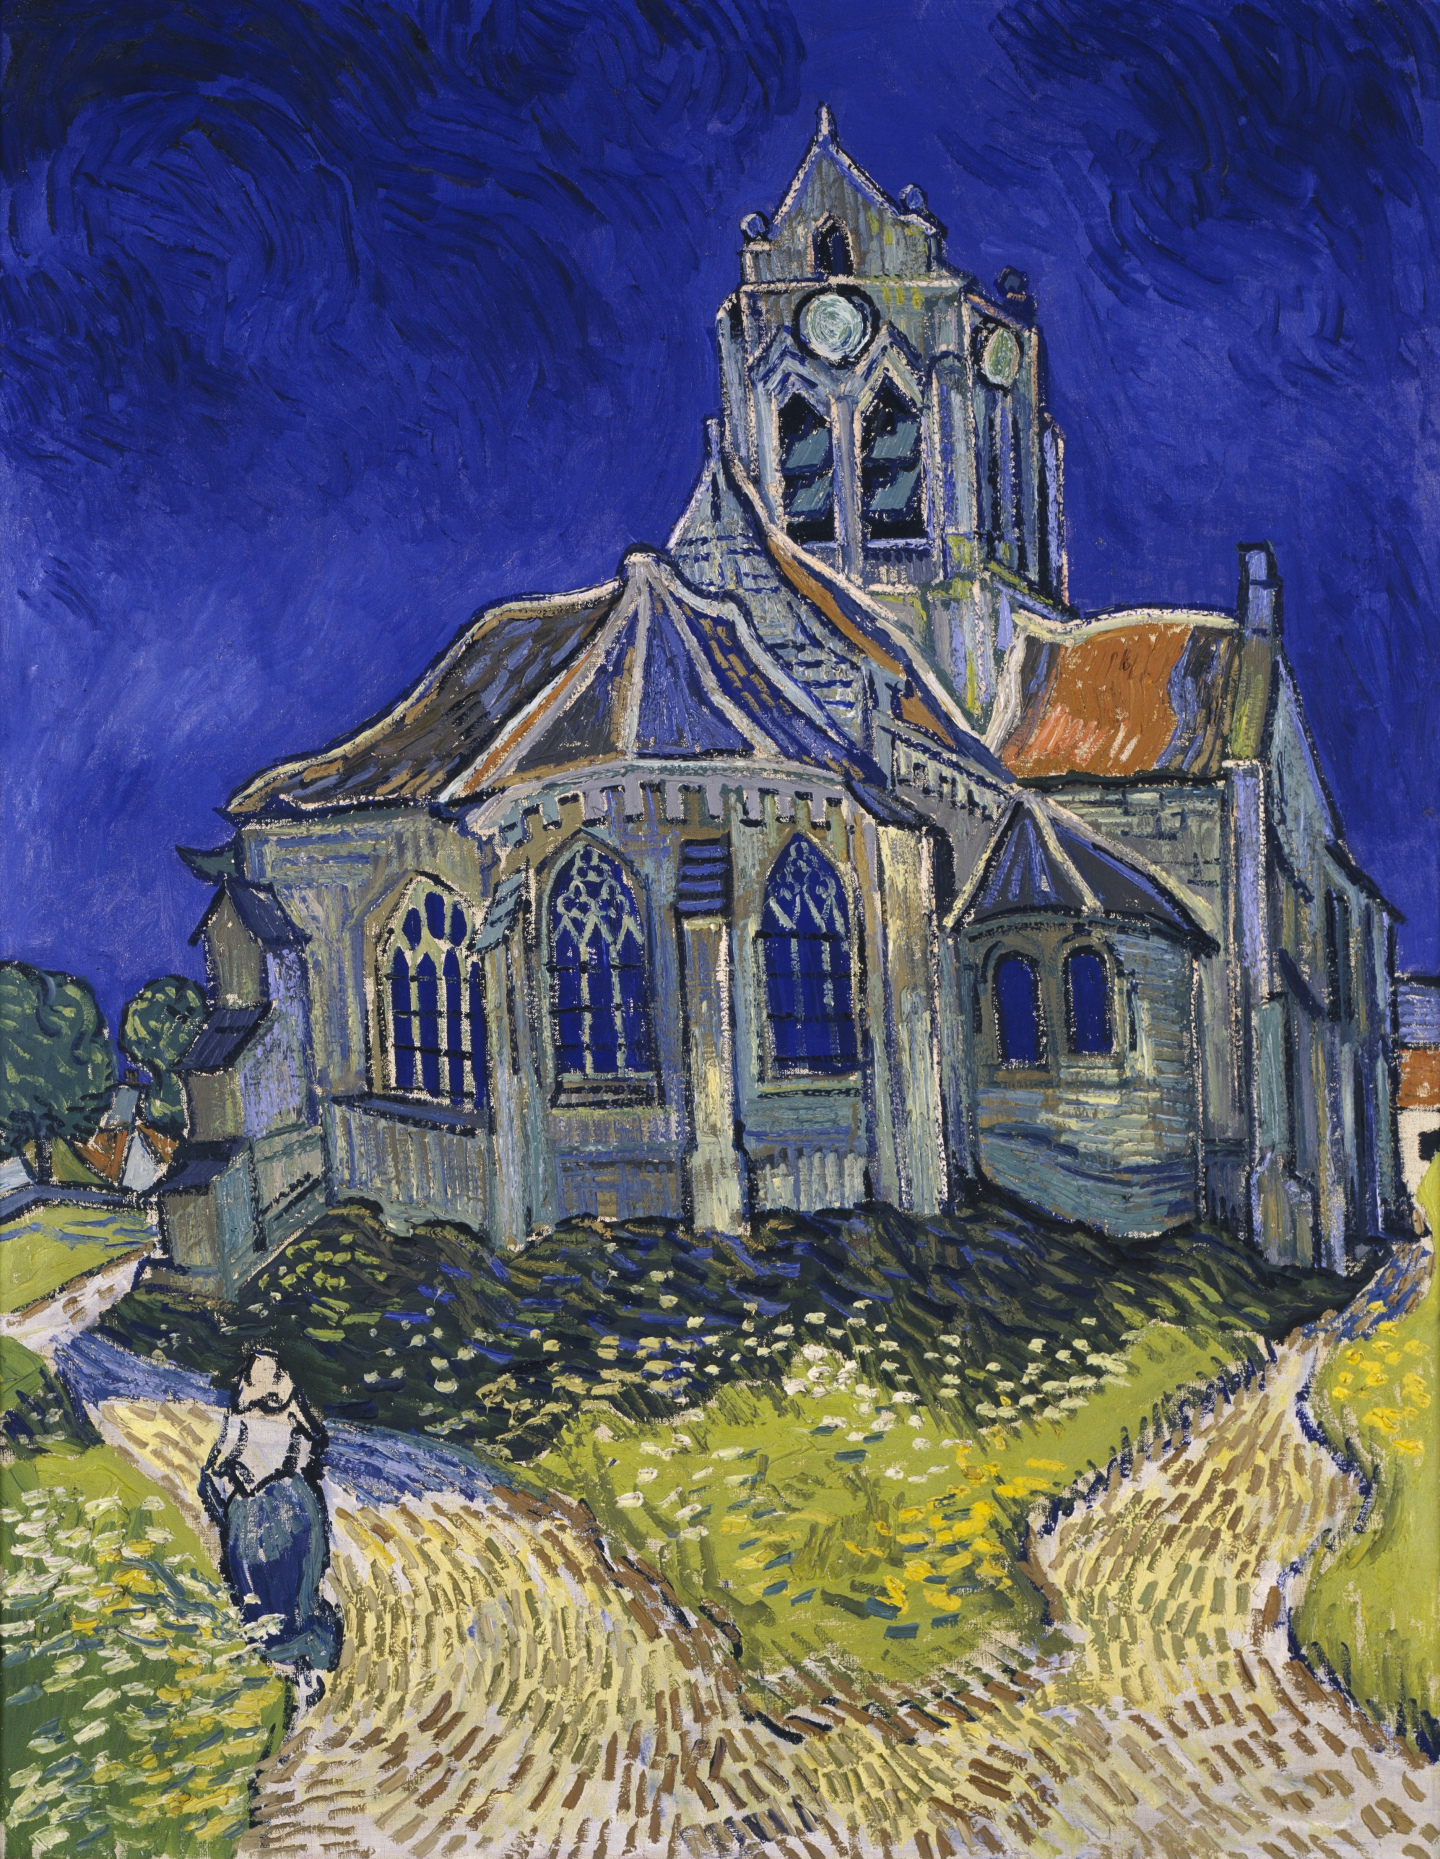 vincent_van_gogh_-_the_church_in_auvers-sur-oise_view_from_the_chevet_-_google_art_project.jpg